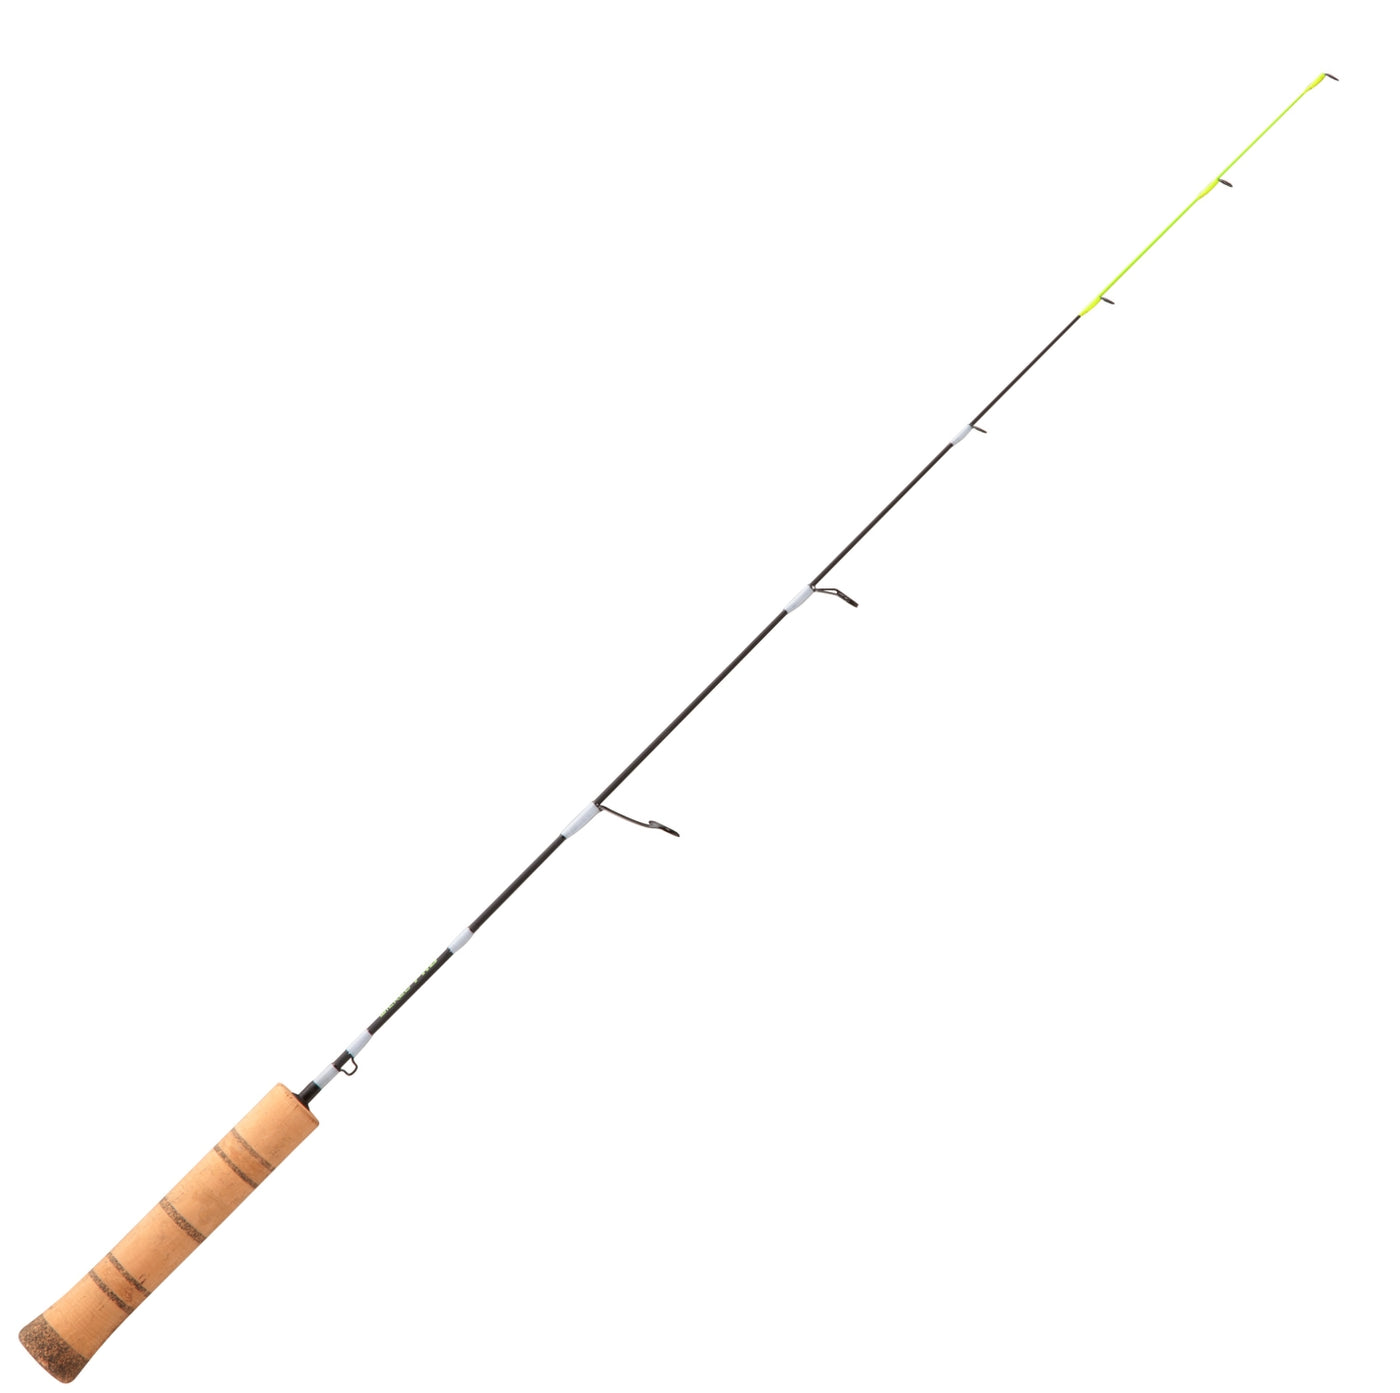  13 FISHING - Wicked Pro Ice Rod - 32 MH-Mod (Medium Heavy  Moderate) - Composite Blank - Split Grip Handle - PS-32MH-Mod : Sports &  Outdoors